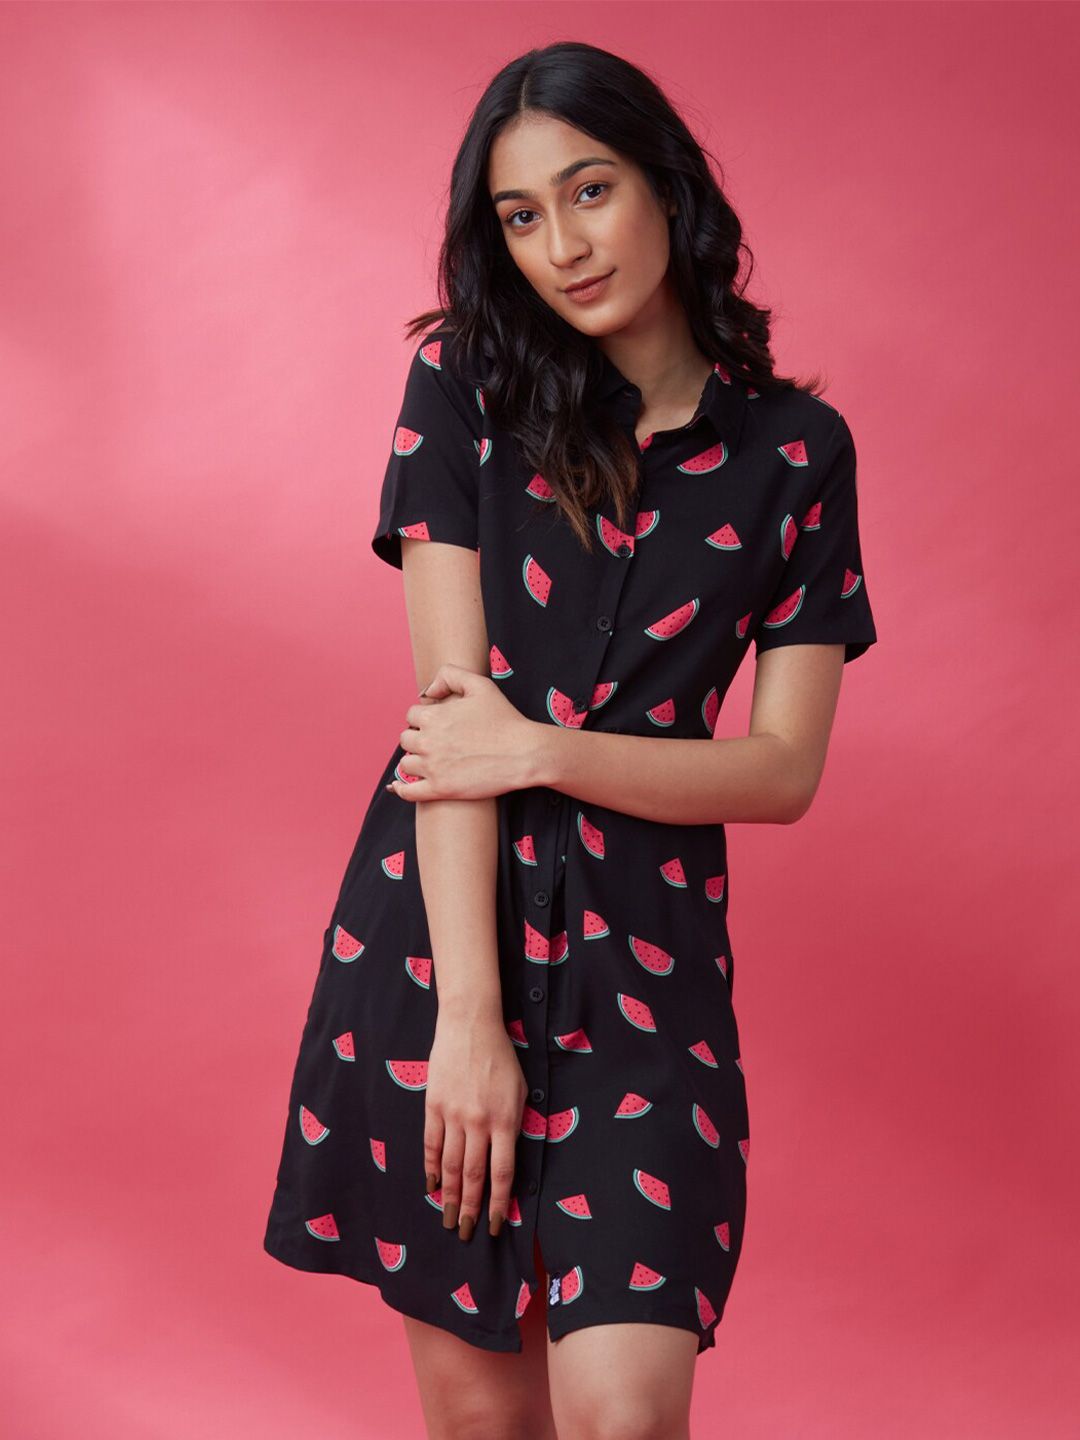 The Souled Store Black & Pink Printed Shirt Dress Price in India